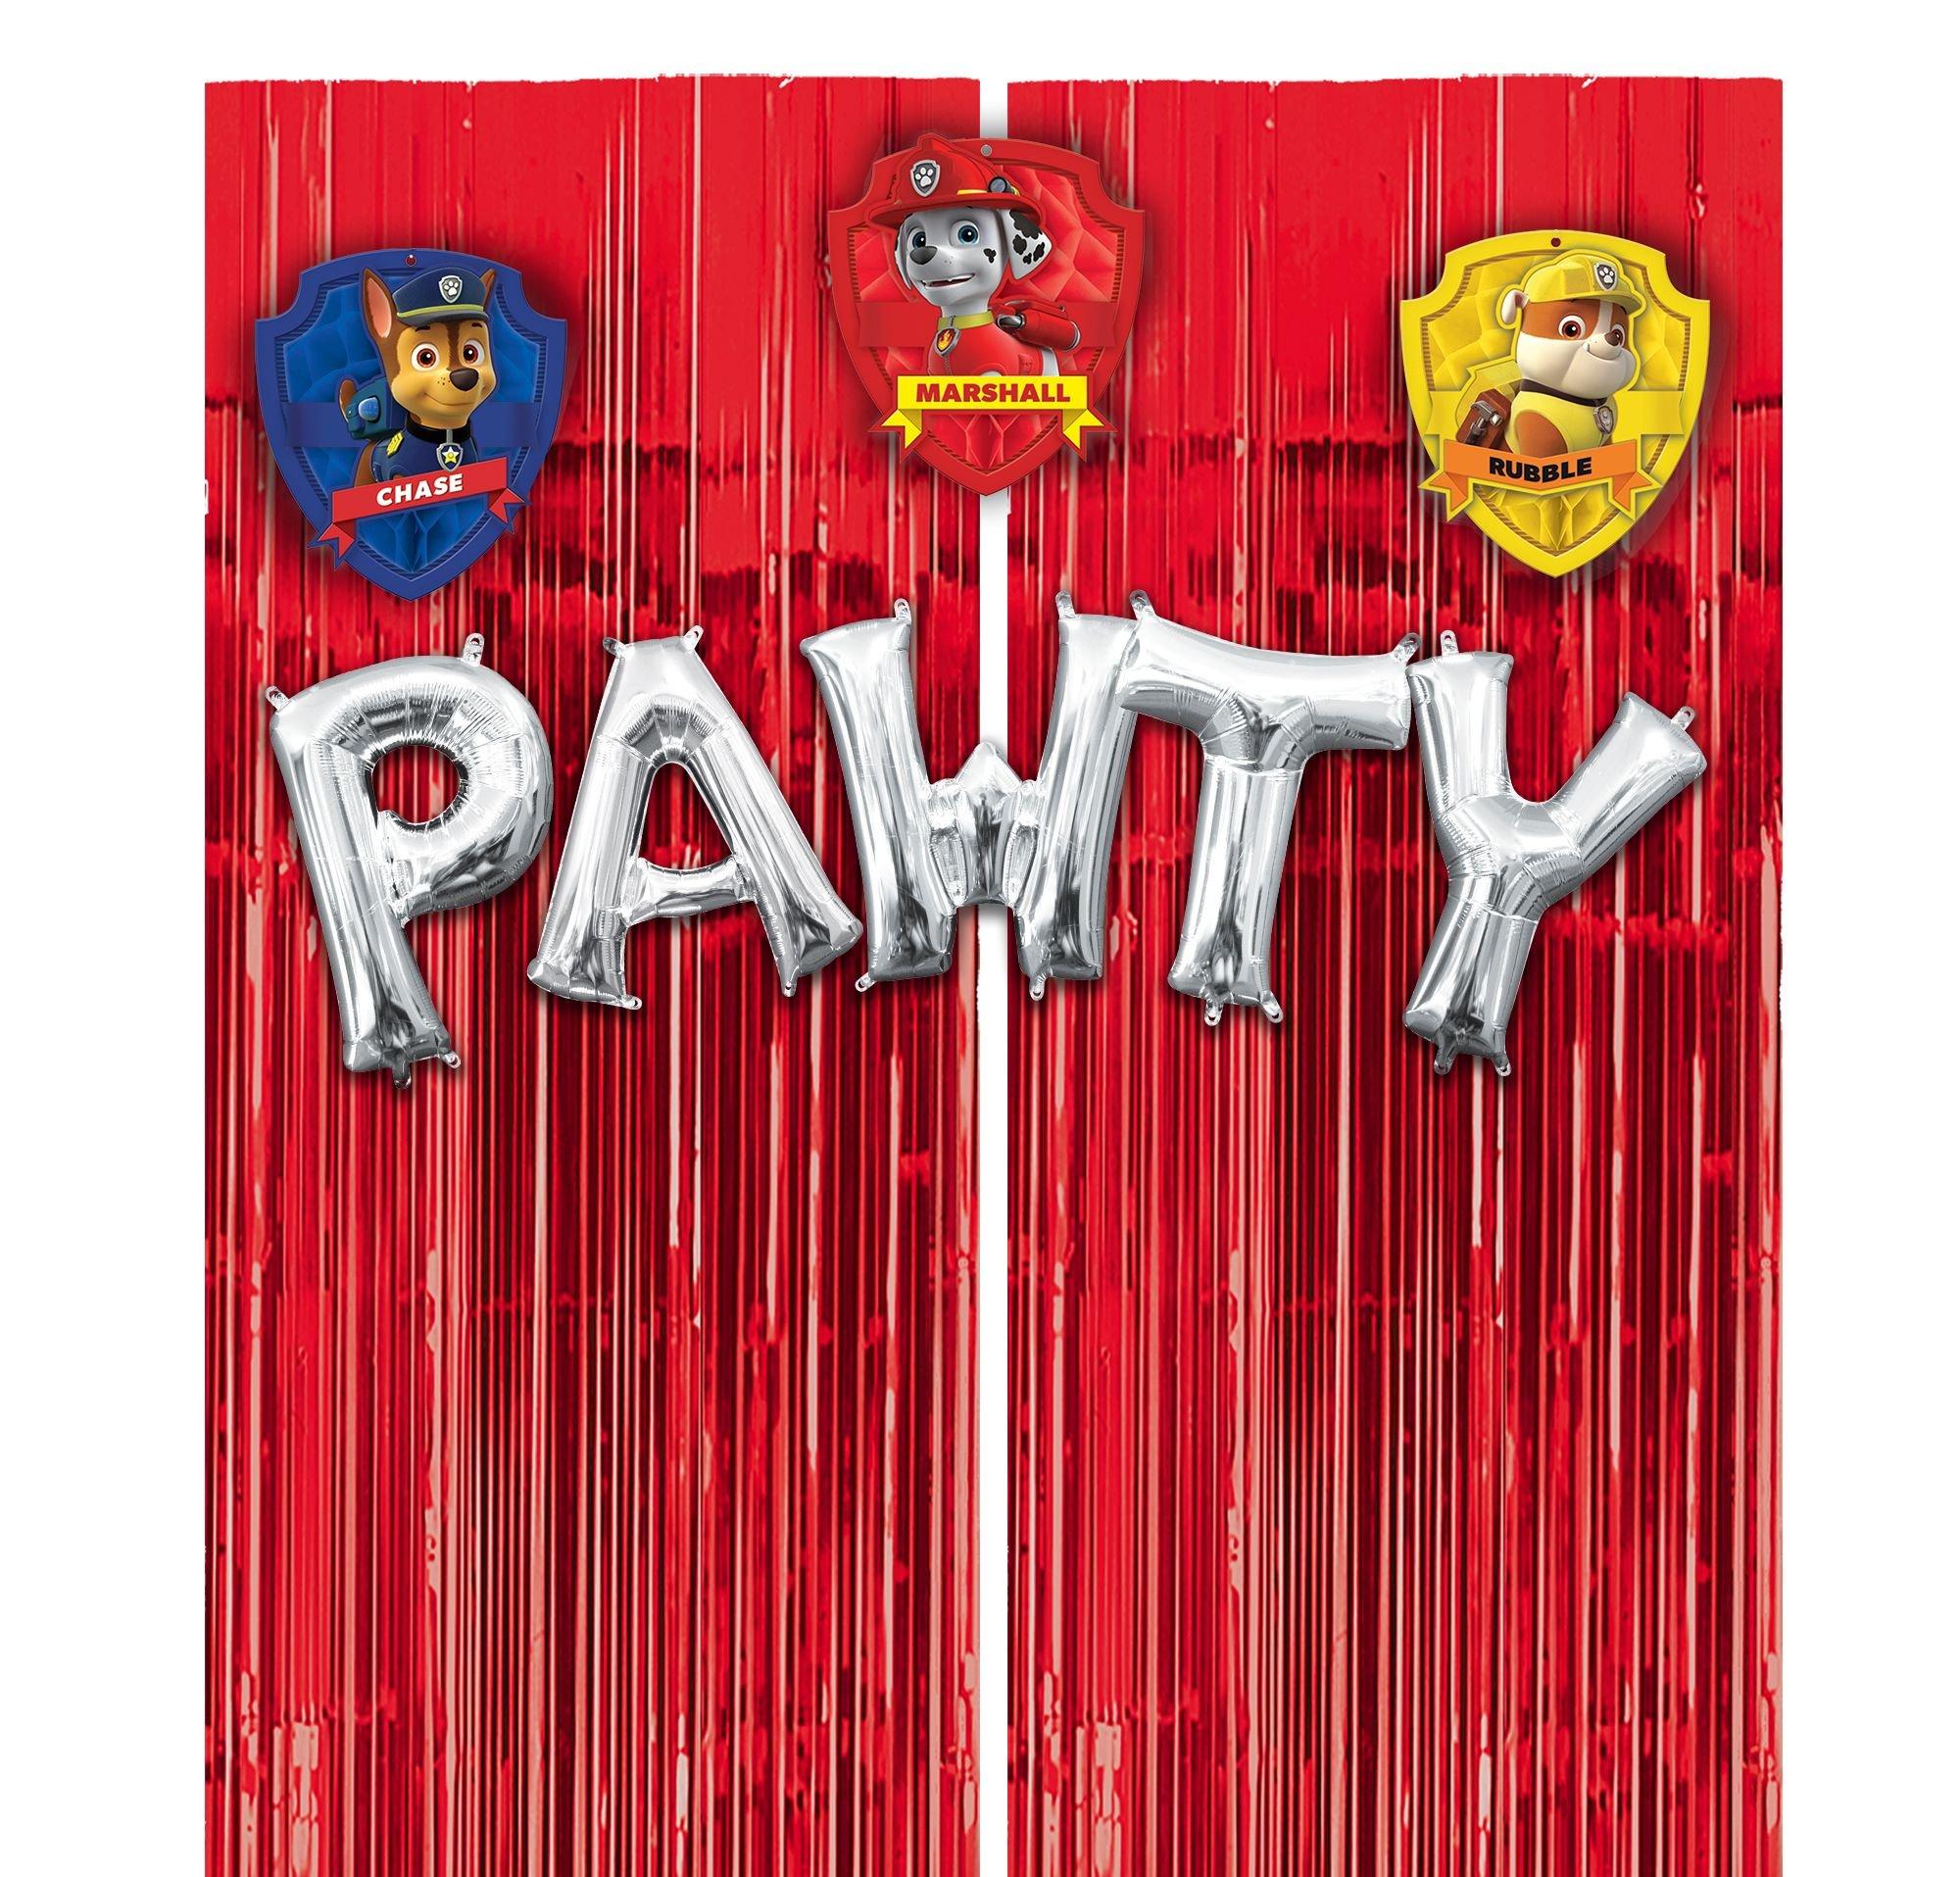 PAW Patrol Fun Balloon Backdrop Supplies Pack - Kit Includes Honeycomb Balls, Letter Balloons & Fringe Curtain